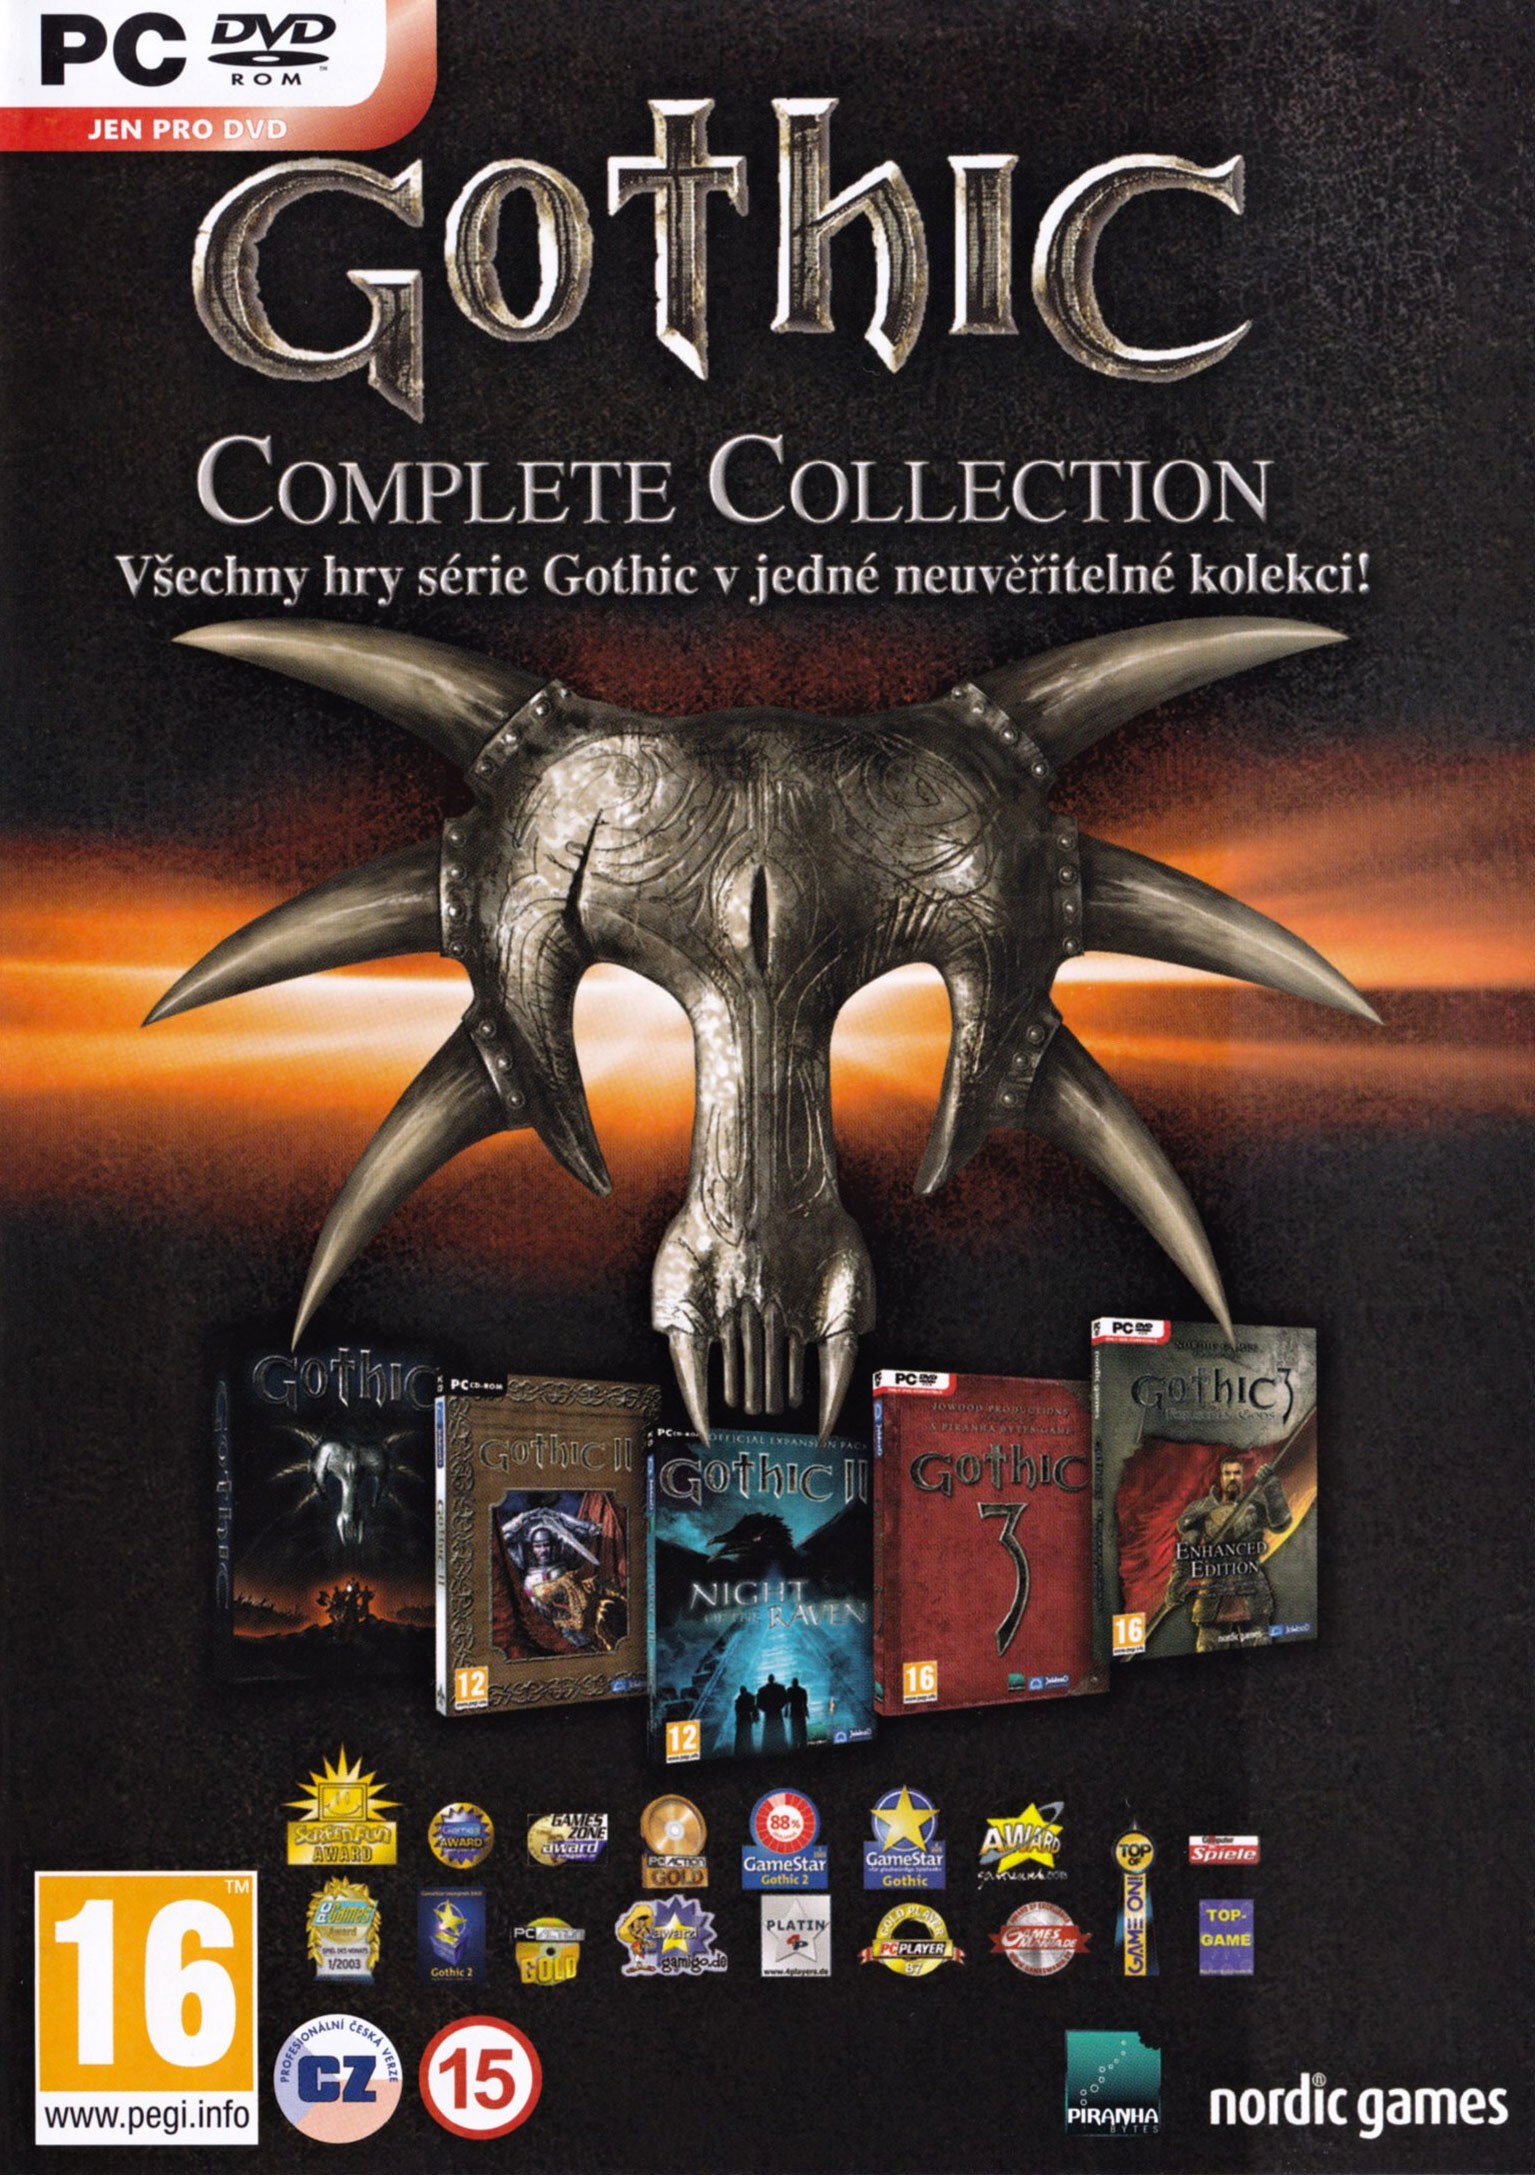 Gothic Complete Collection - predn DVD obal